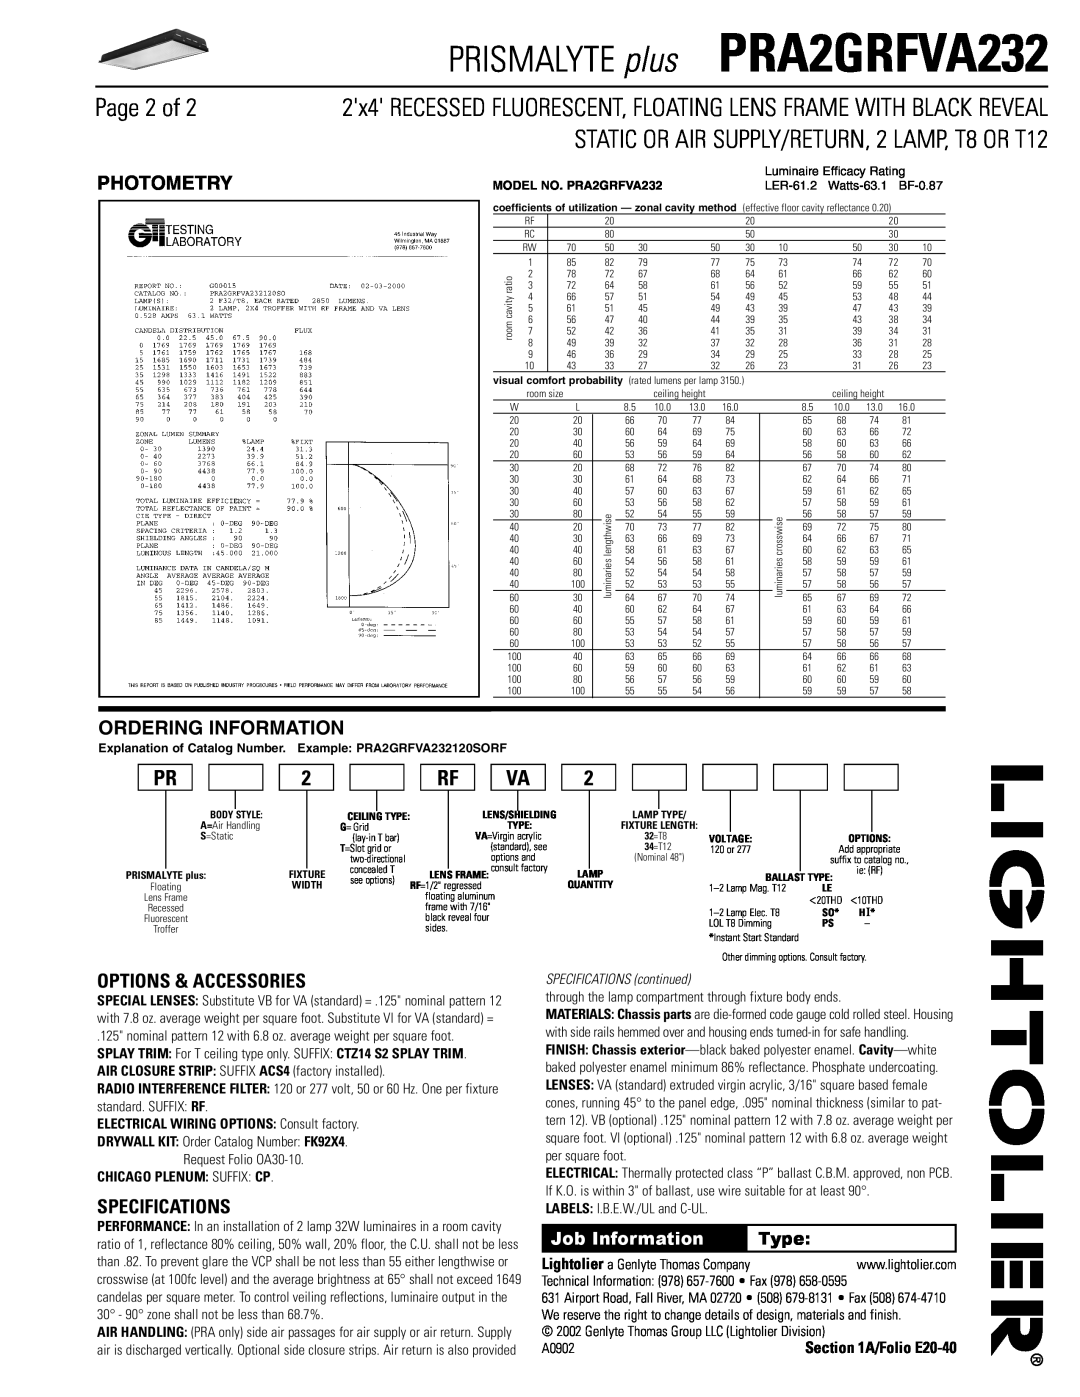 Lightolier PRA1GRFVA232 dimensions Page 2 of, Photometry, Ordering Information, Options & Accessories, Specifications, Type 